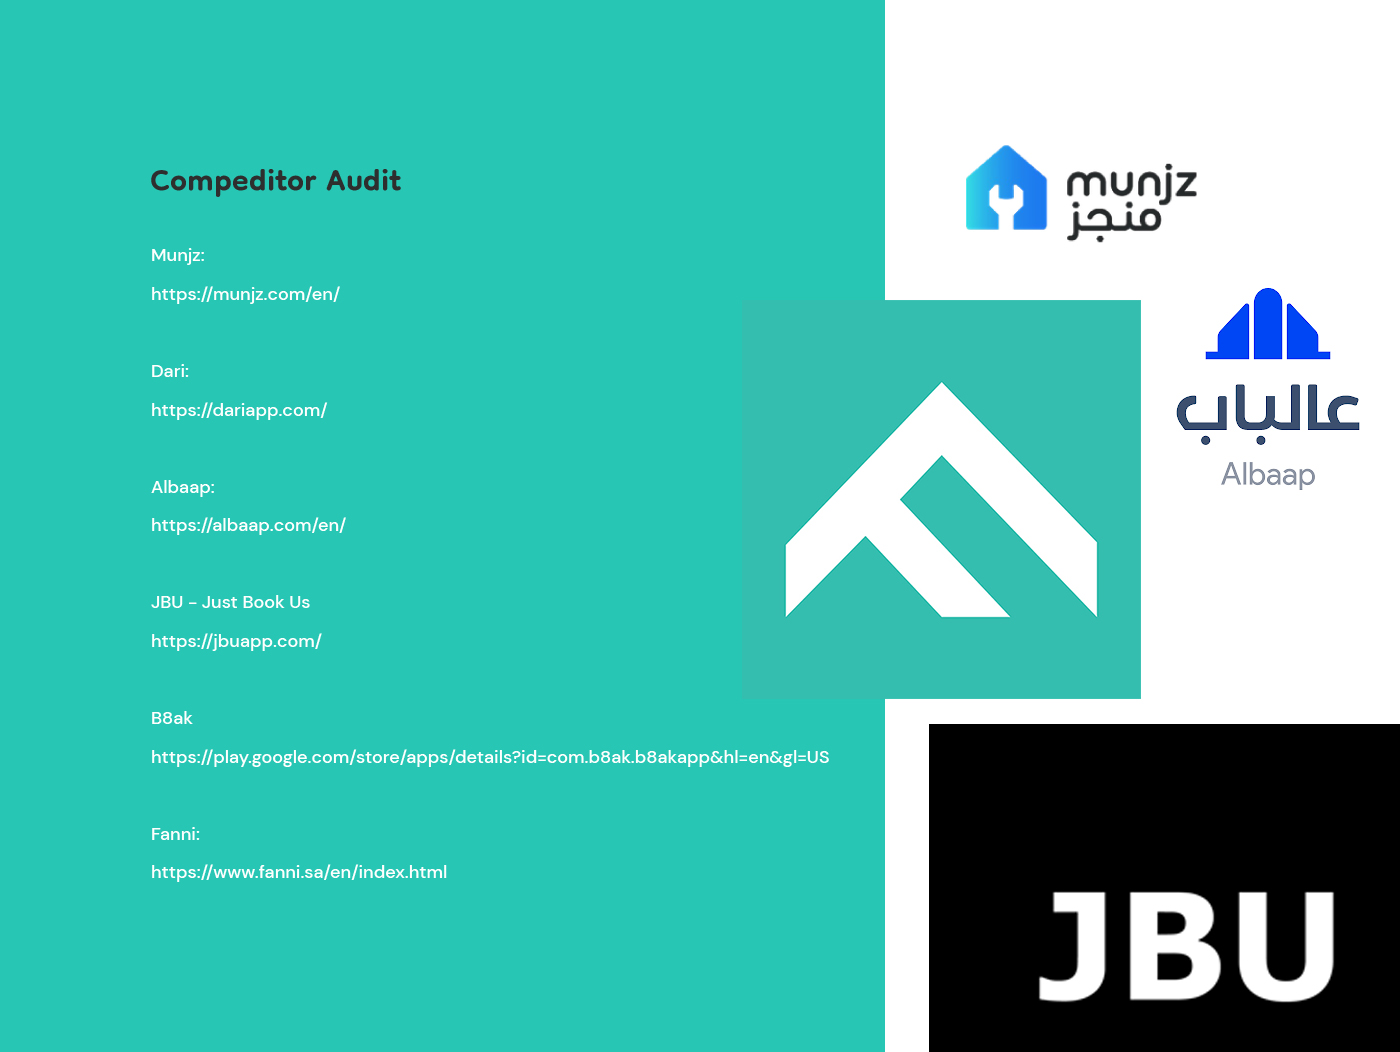 competitor audit image